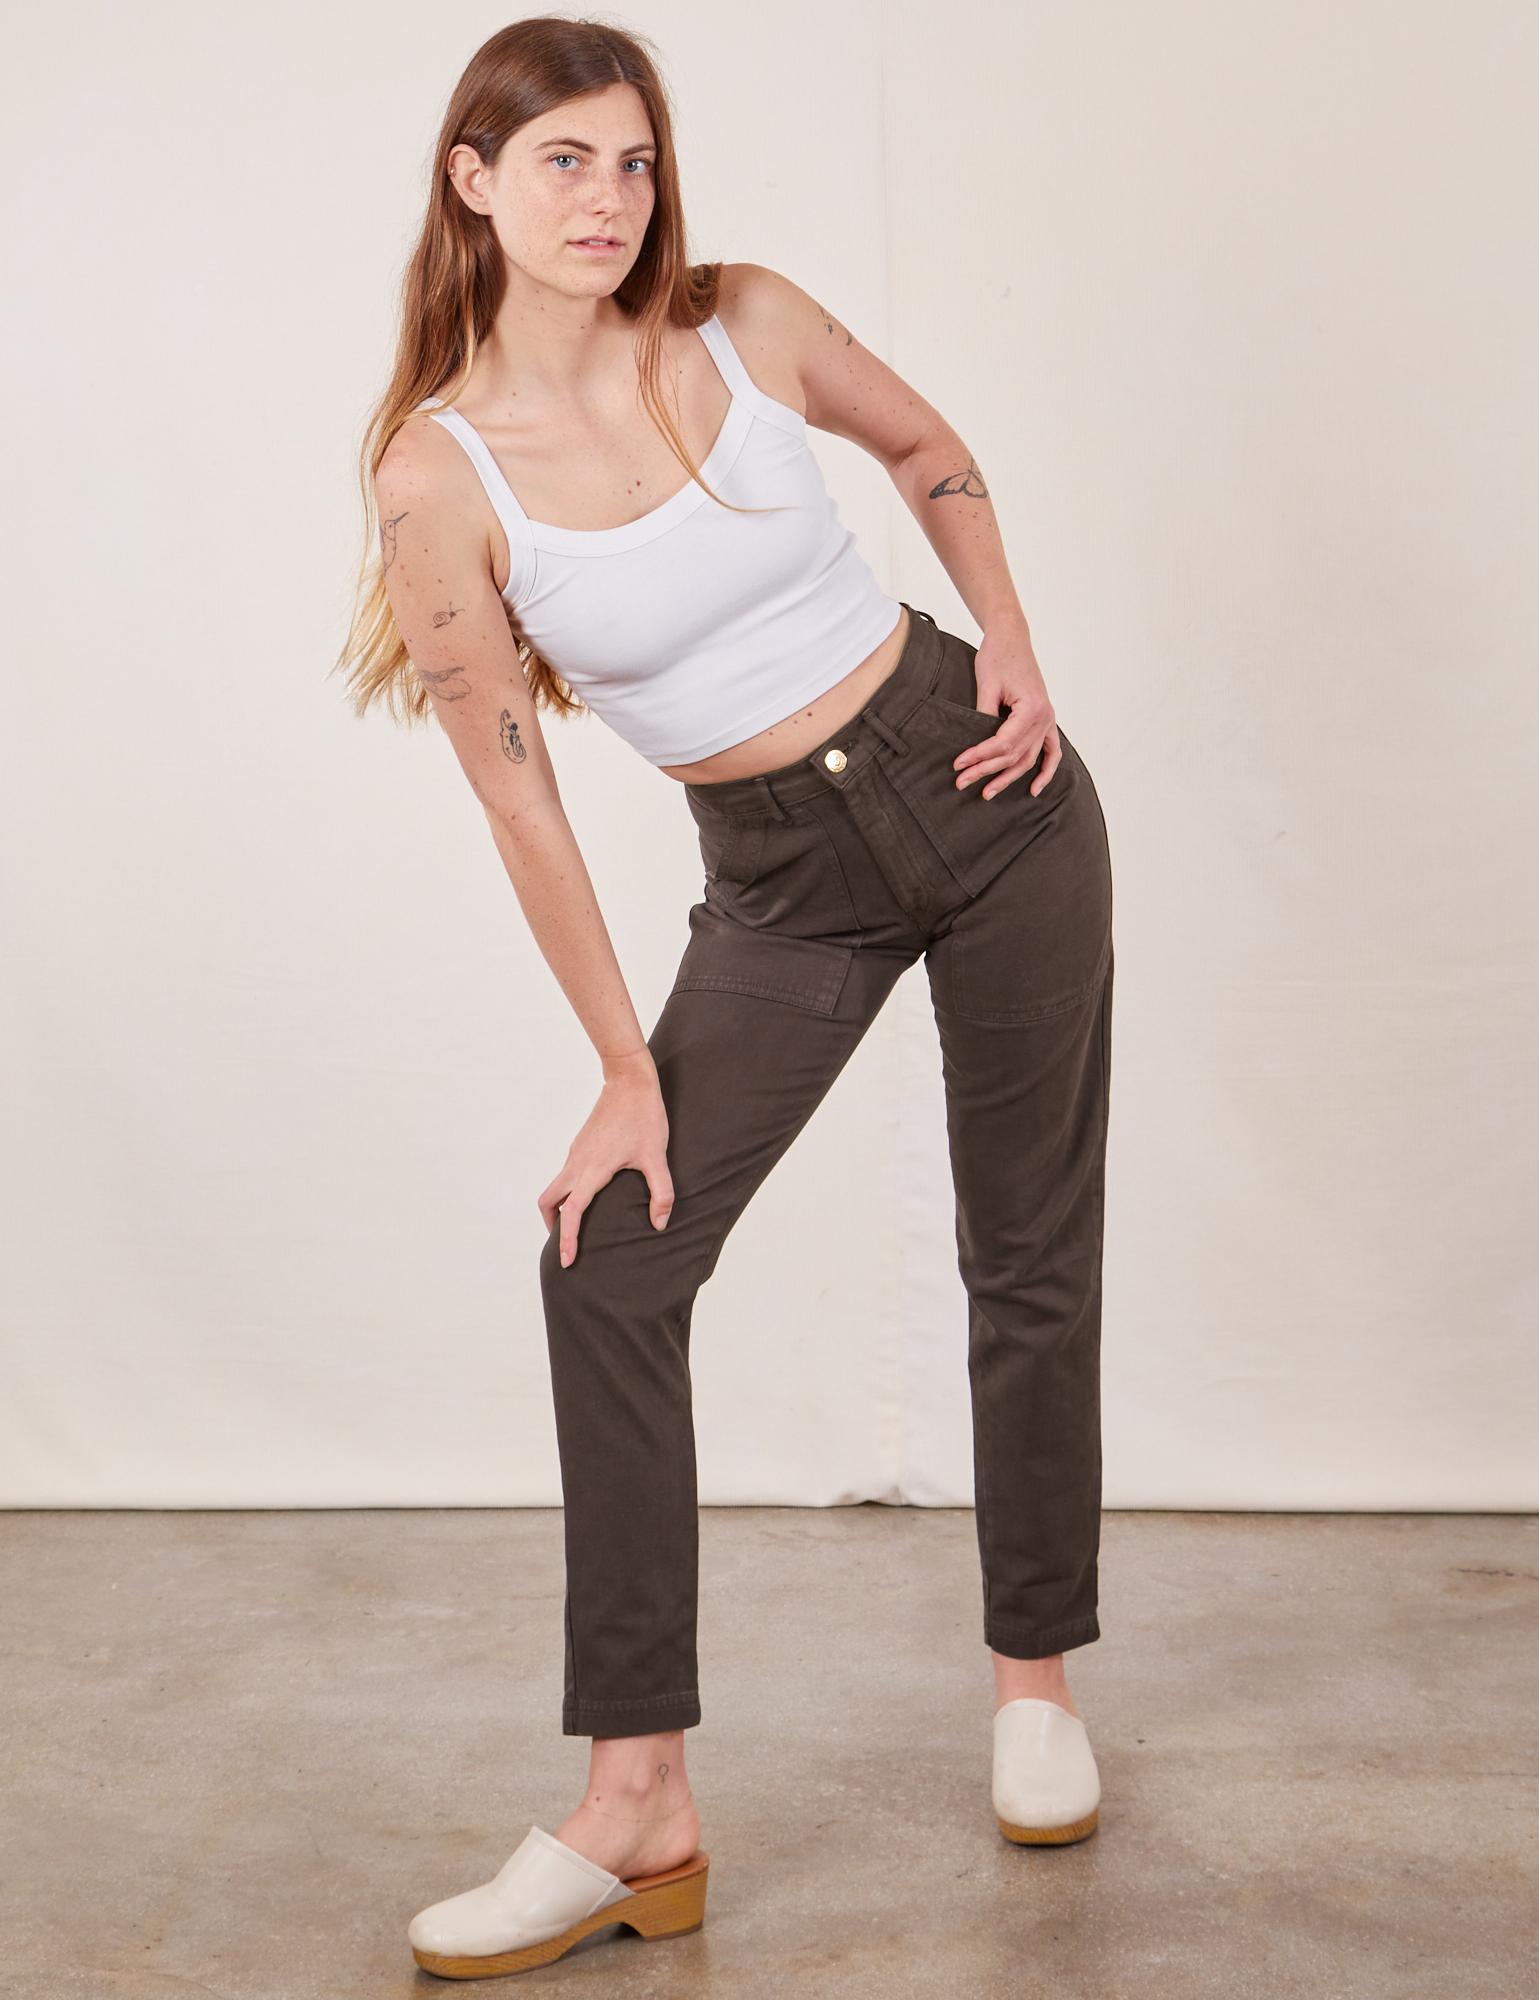 Scarlett is wearing Pencil Pants in Espresso Brown and Cropped Cami in vintage tee off-white